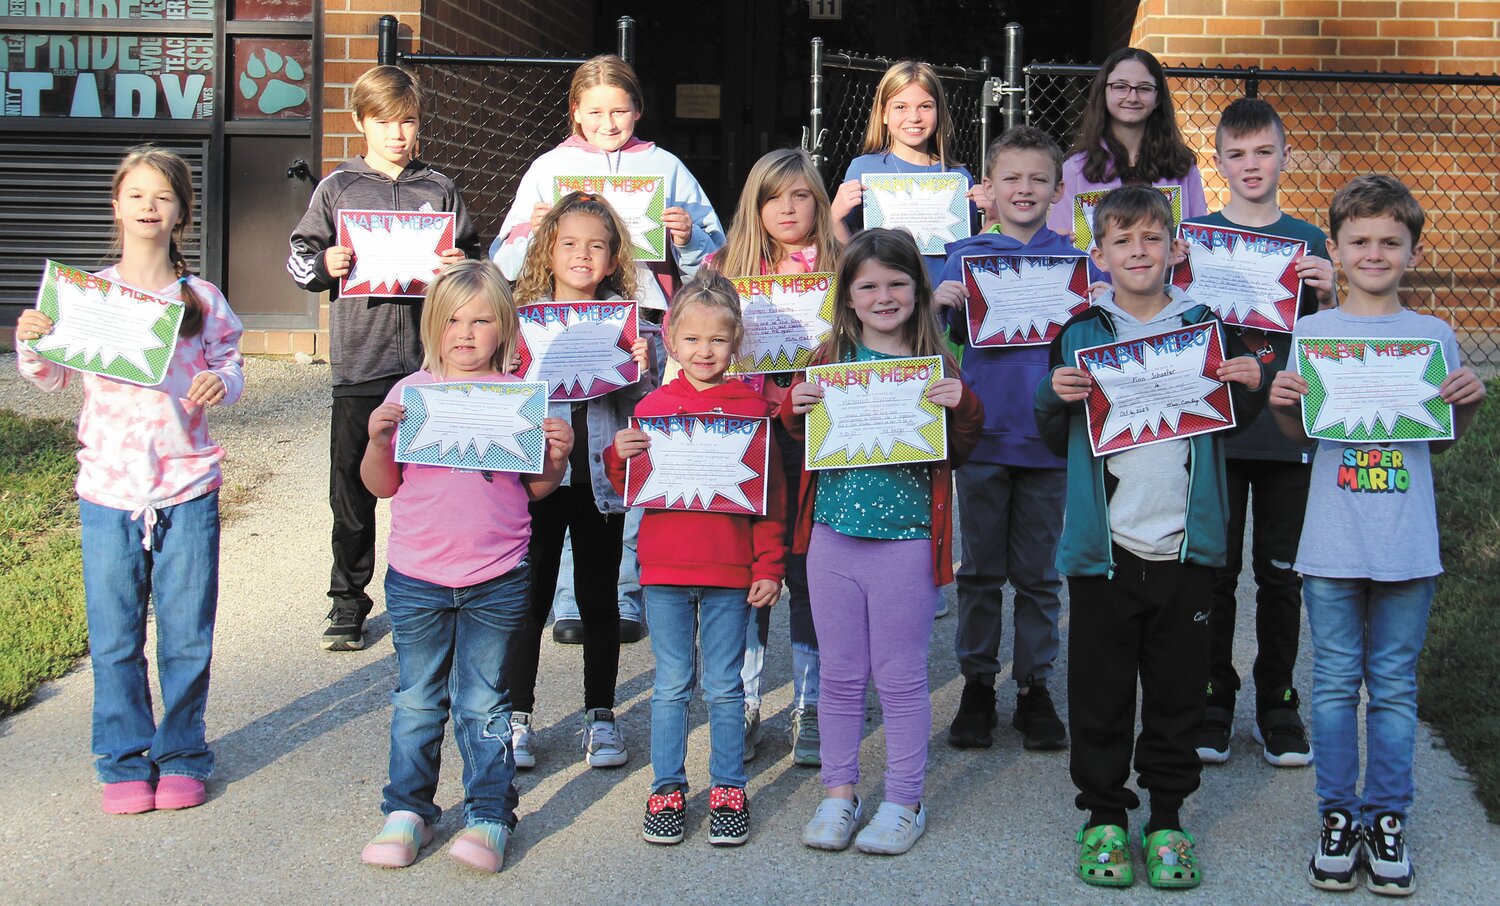 As a part of their Leader in Me program, Turkey Run Elementary students received Habit Hero Awards. Habit Hero awards are given to students who set an example by being a good leader and demonstrate one of the seven habits. Awards are presented by staff members to students who they believe have excelled in one of the habits. Earning Habit Hero awards for September are, front row, Leah Wirth, Sparrow Stakley, Mackenzie Blystone, Finn Schaefer and Theodore Davies; middle row, Izy Staggs, Cali Bennington, Ashton Foxworthy, Nolan Lamb, and Axel Irelan; and back row, Carter Chapman, Emma Weise, Lorie Reynolds and Abby Mauntel. Not pictured is Eli McCoy and Kevin Thompson.